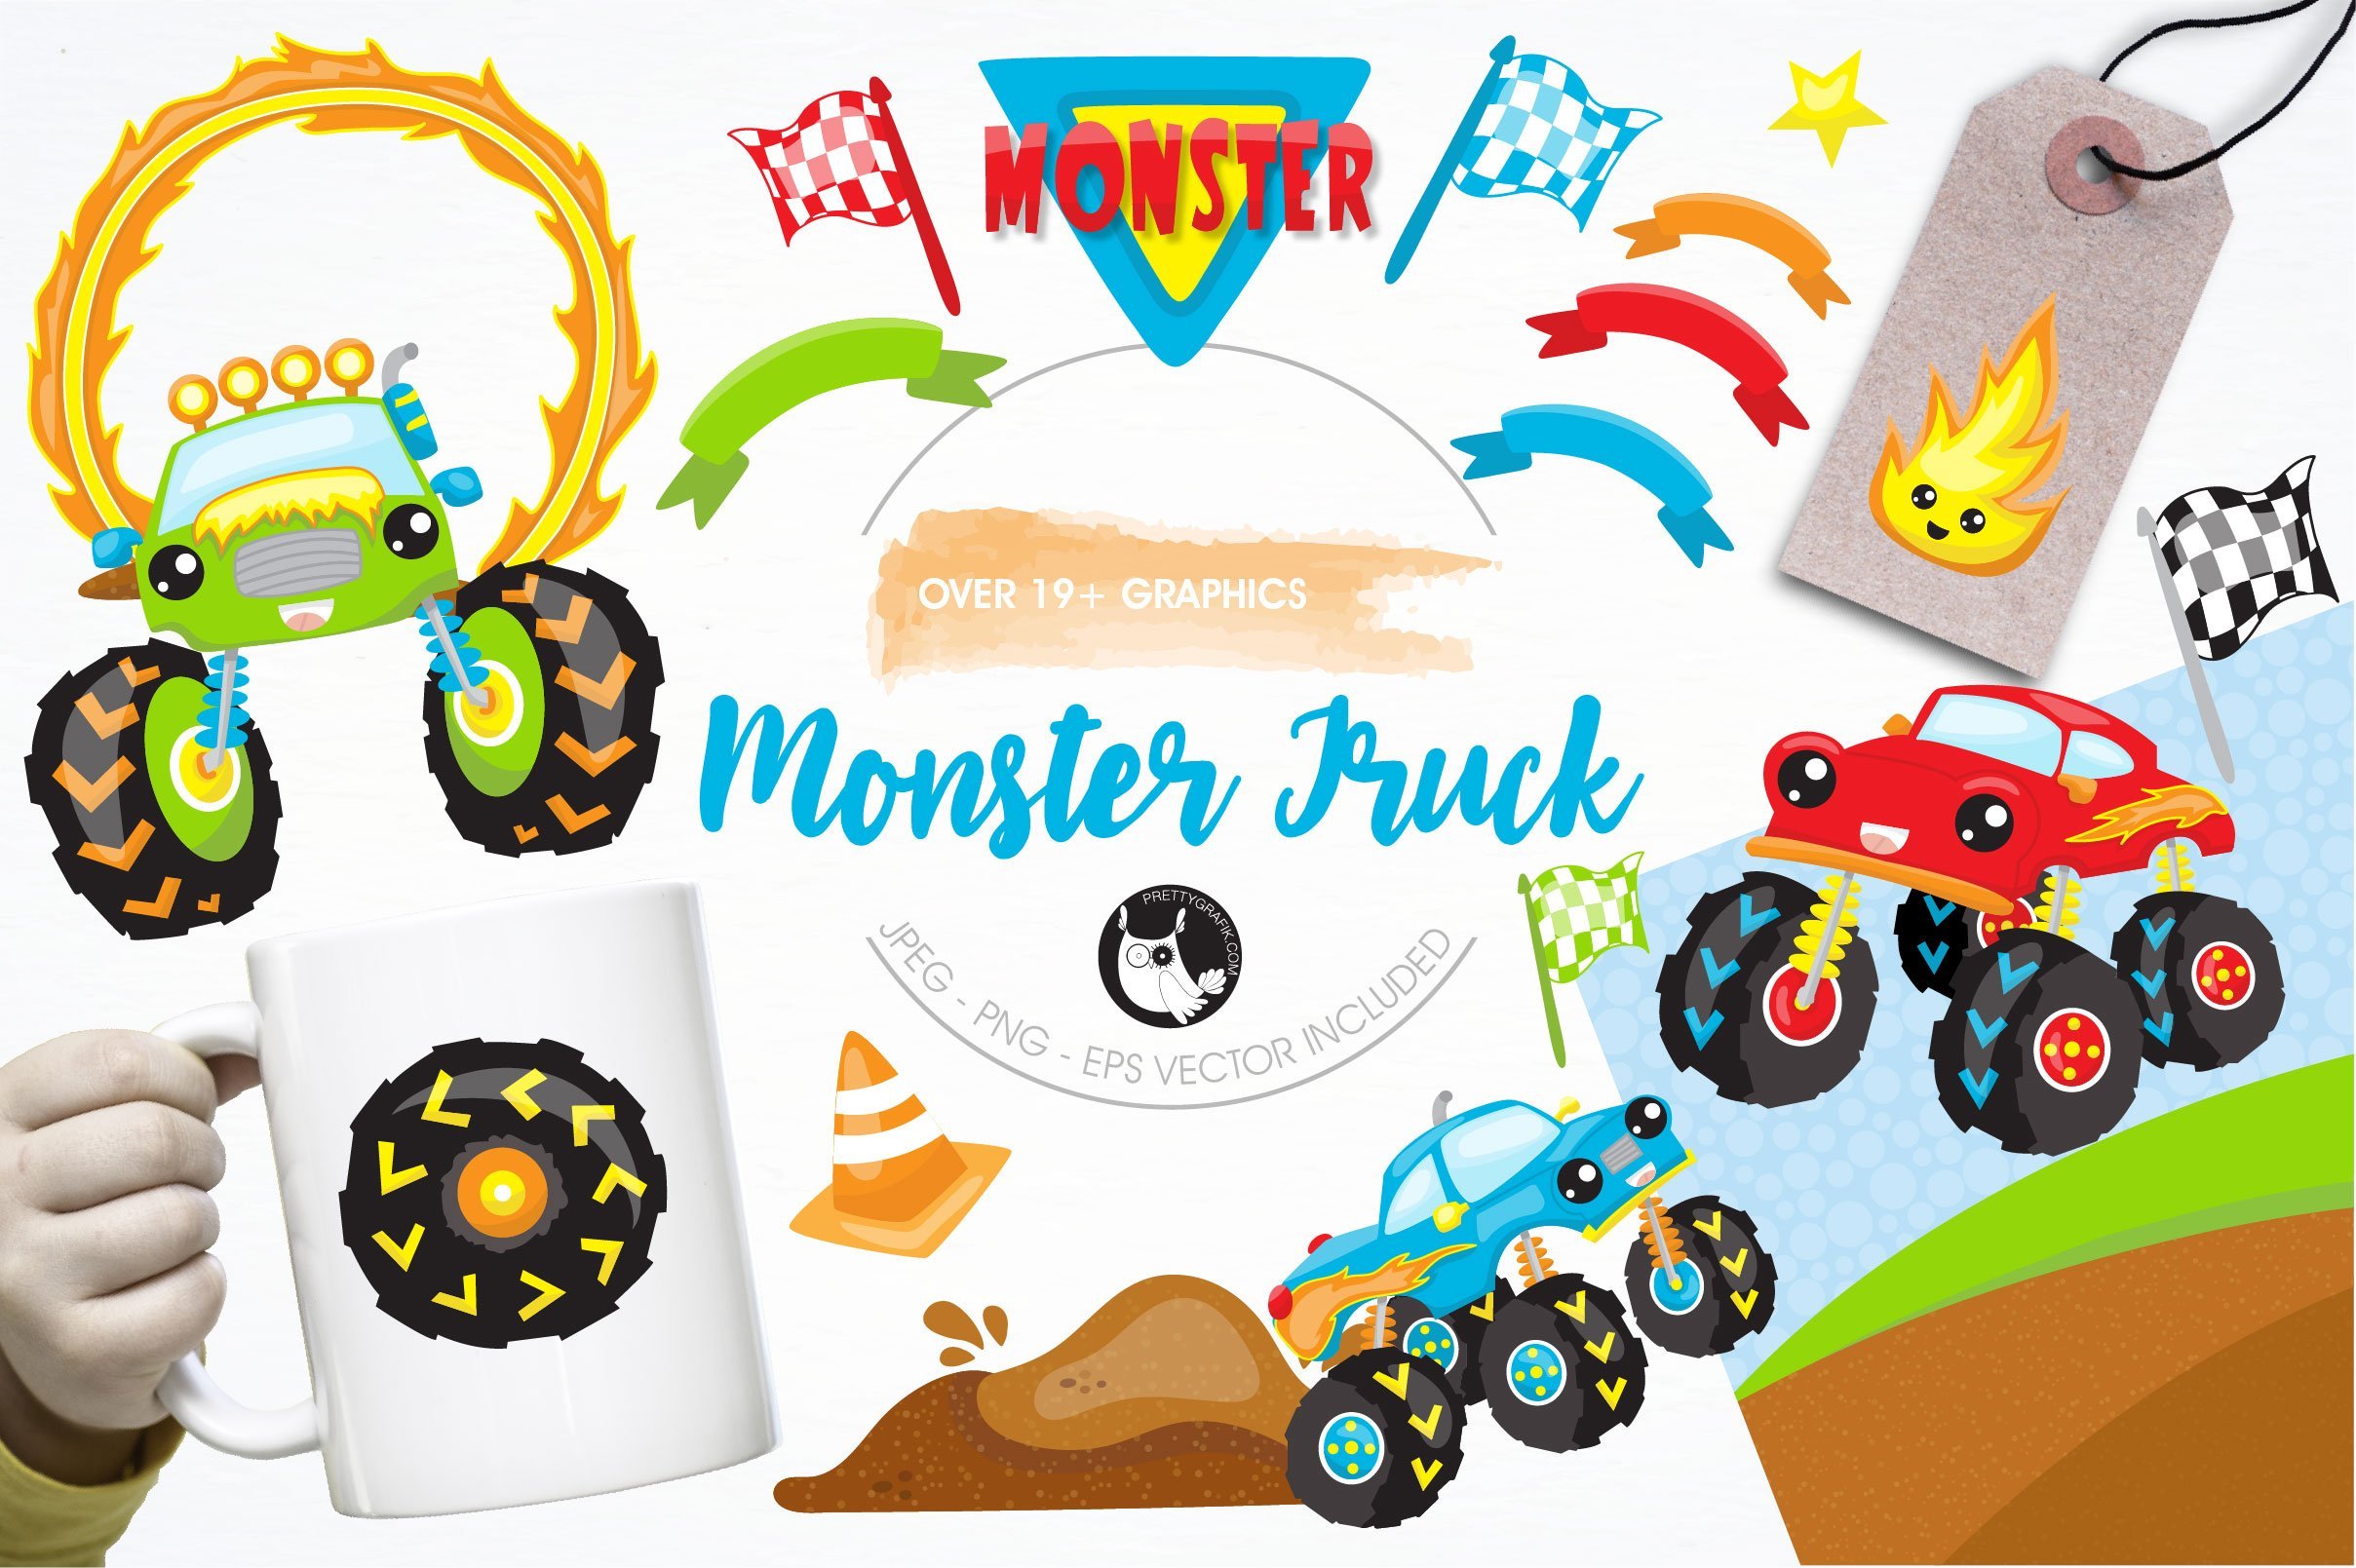 Truck graphics and illustrations - Vector Image